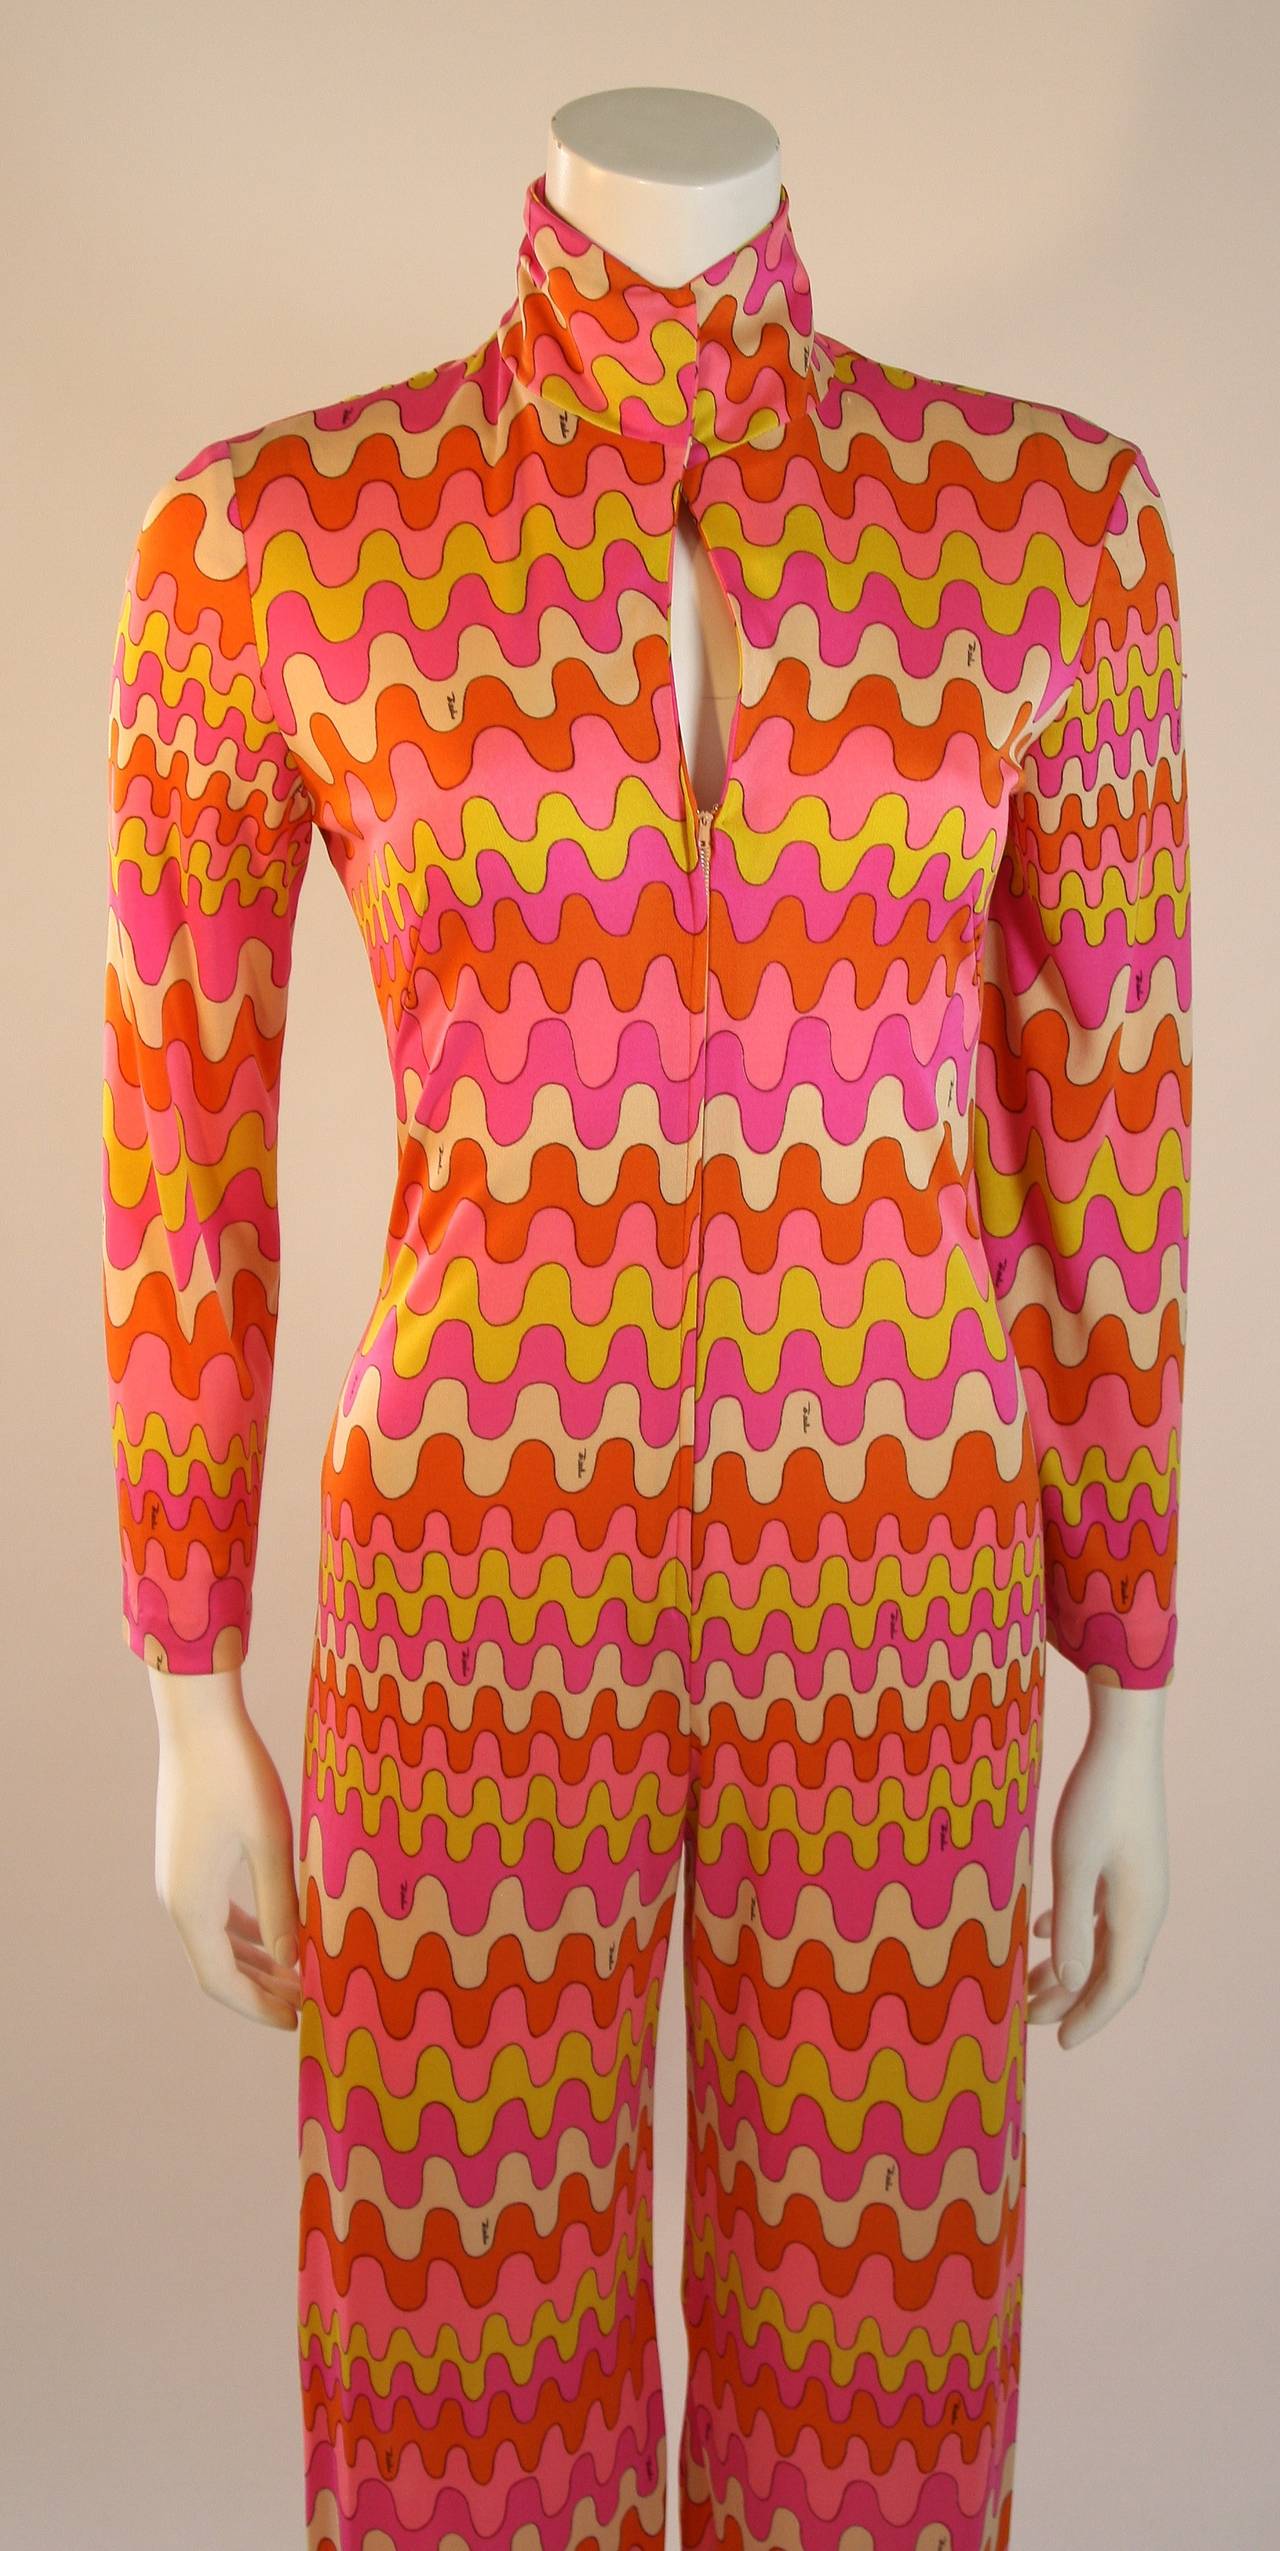 This is an Emilio Pucci design. This wonder jumpsuit features a center front zipper and snap neck closure. The suit is composed of a stretch jersey in orange, pink, and yellow hues. Made in Italy. 

Measures (Approximately)
Length: 58.25